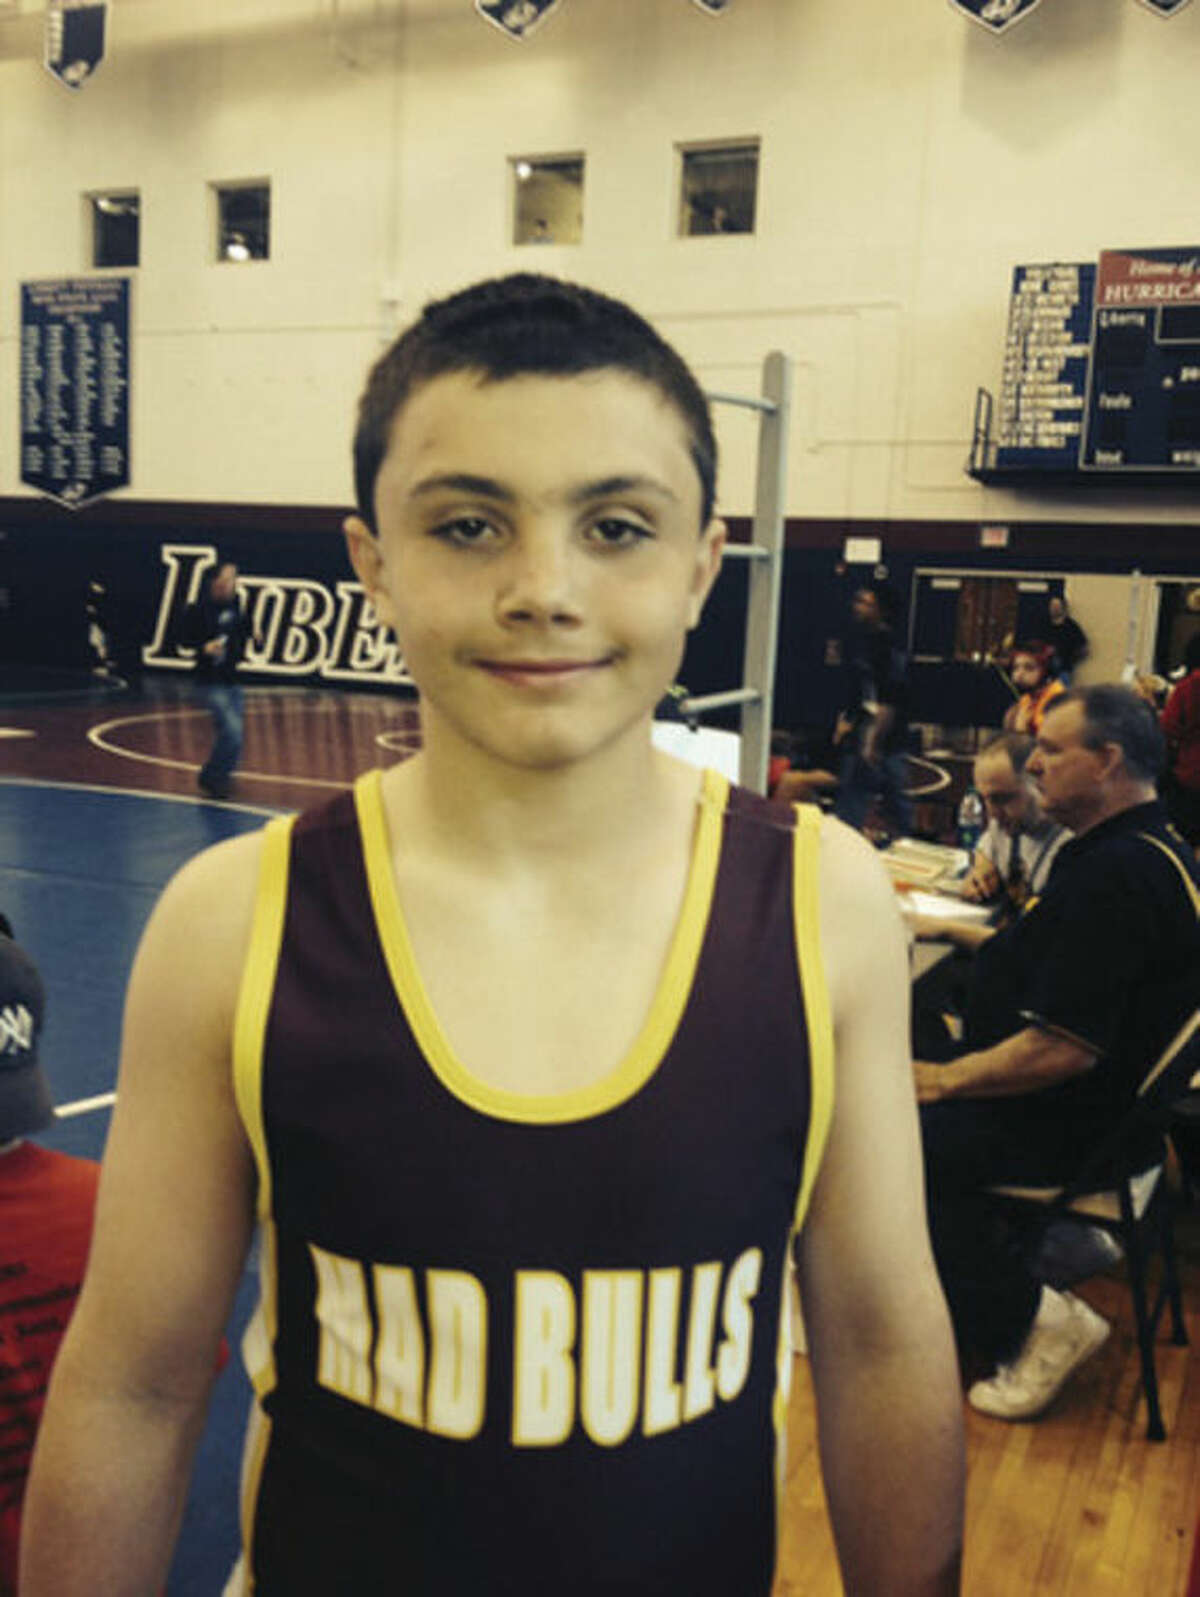 Youth Wrestling: Cocchia qualifies for Eastern Nationals